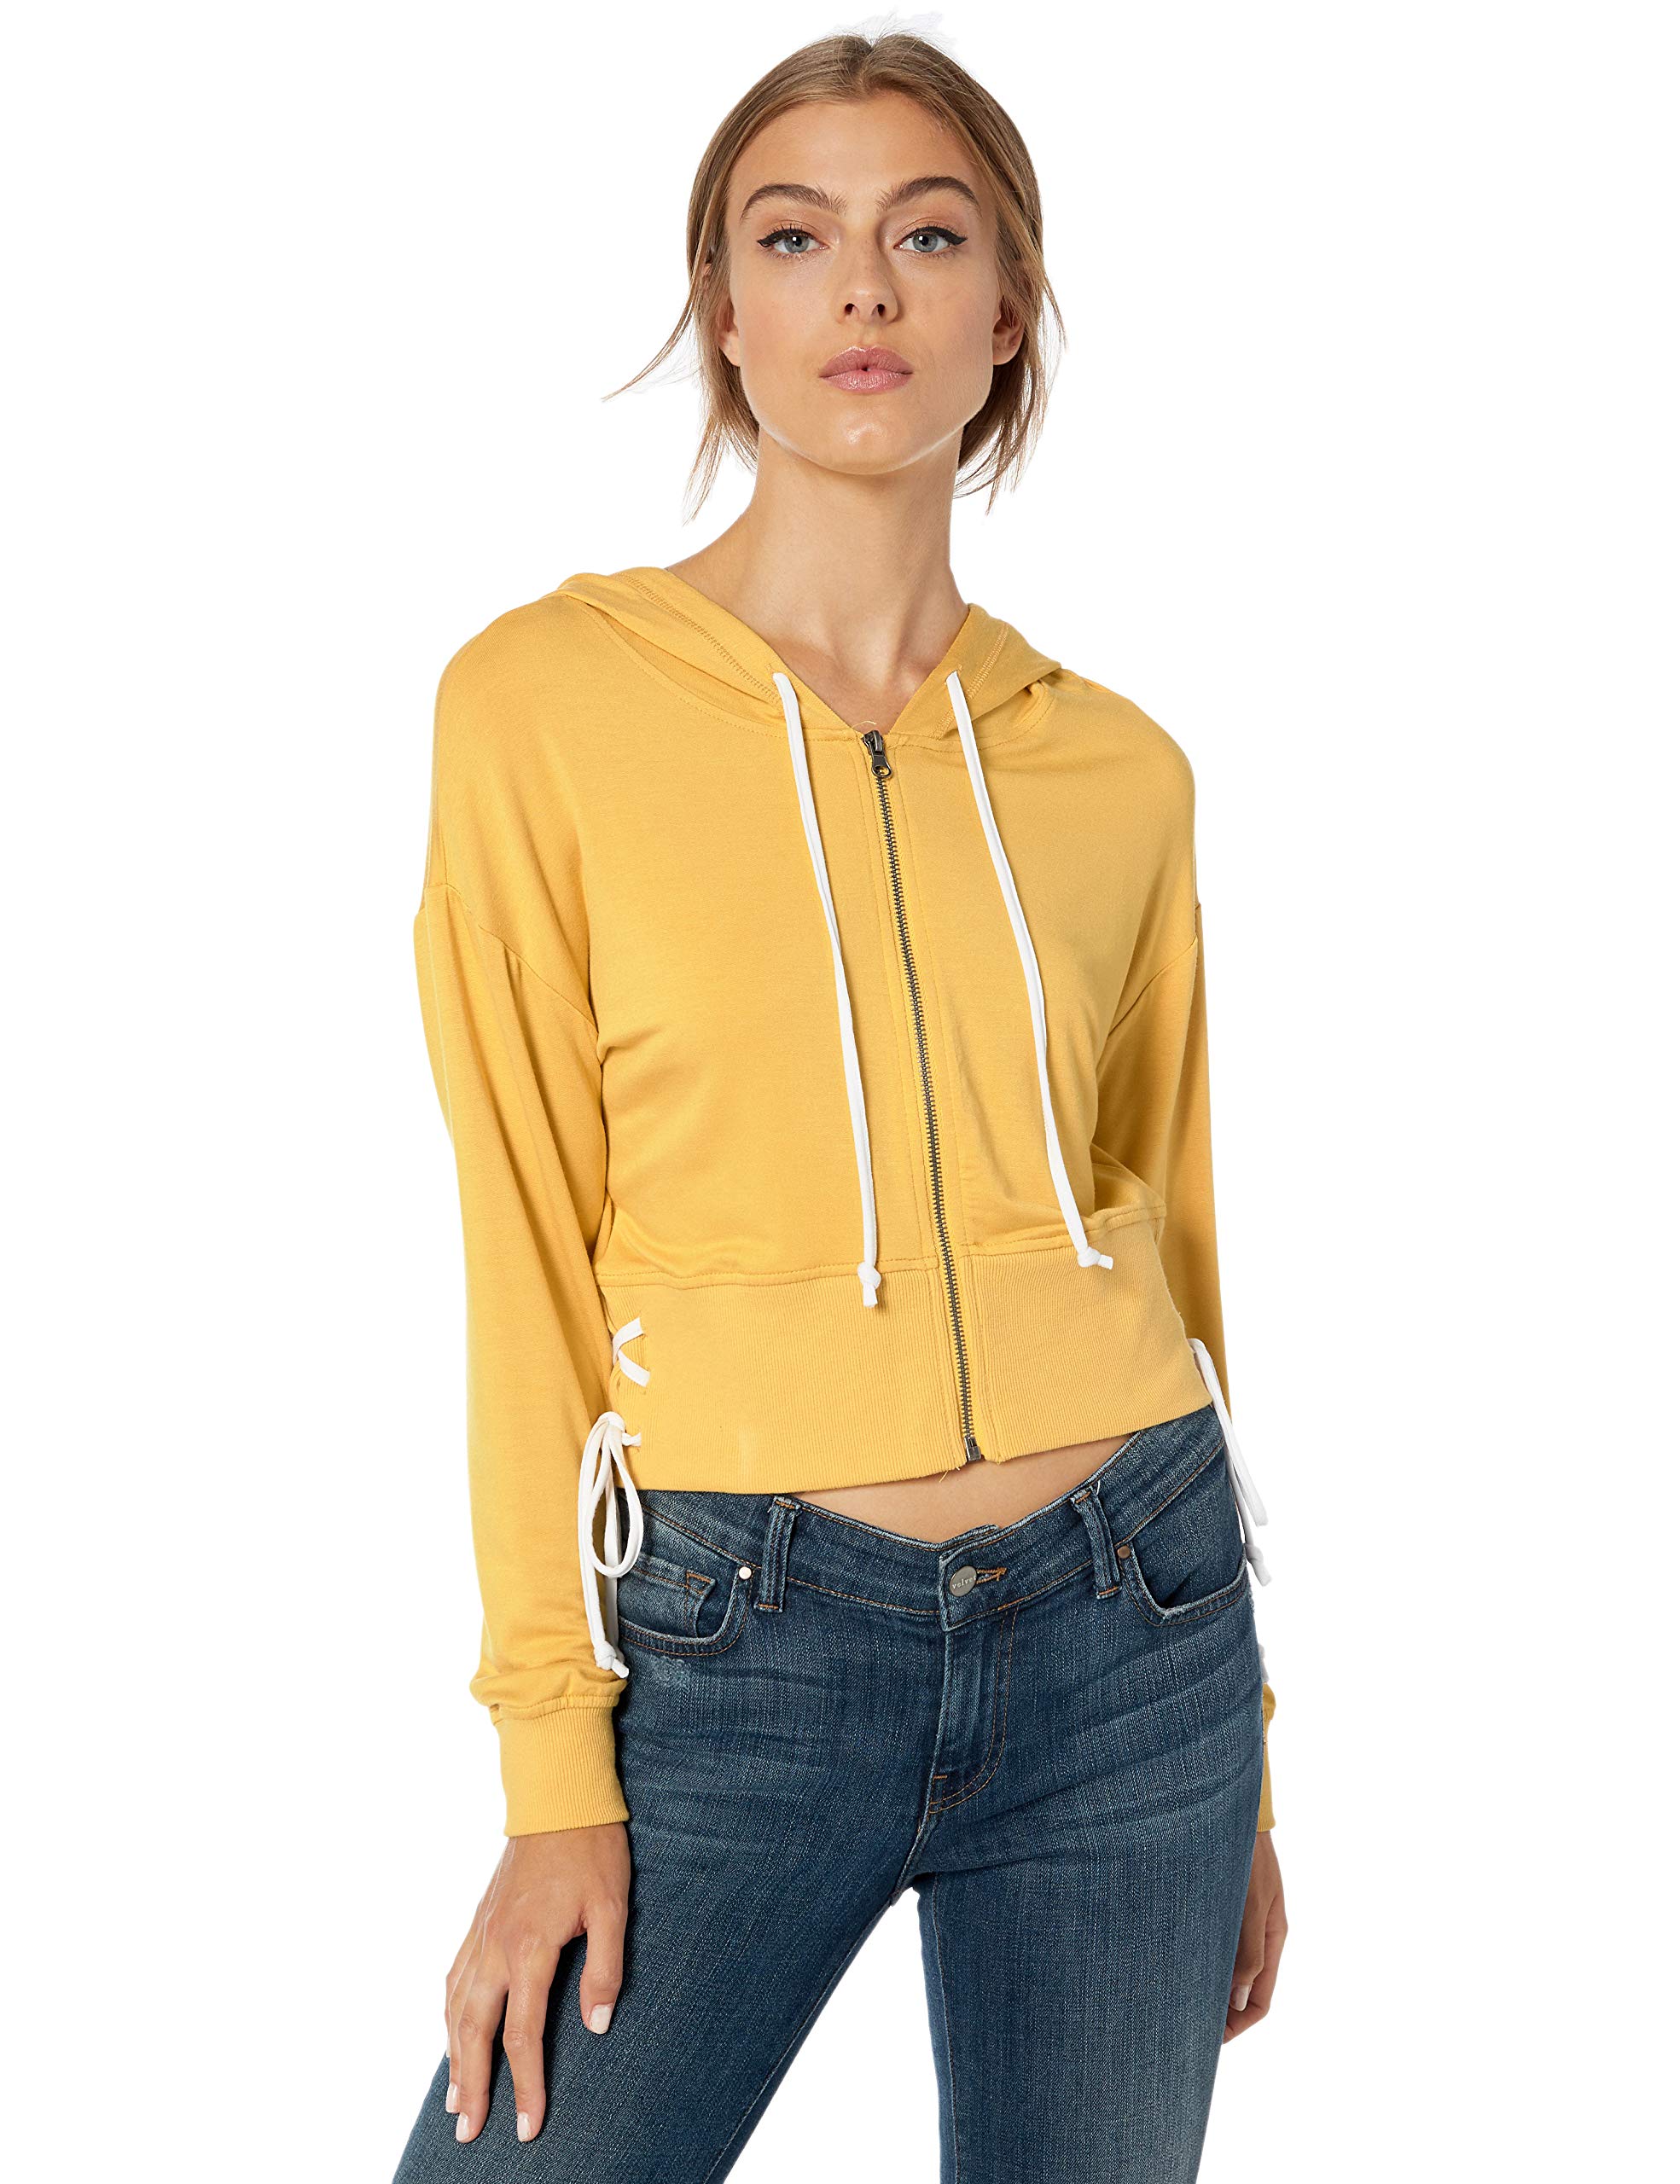 BCBGeneration Women's Lace-Up Cropped Hoodie Jacket - XX SMALL, Yellow ...